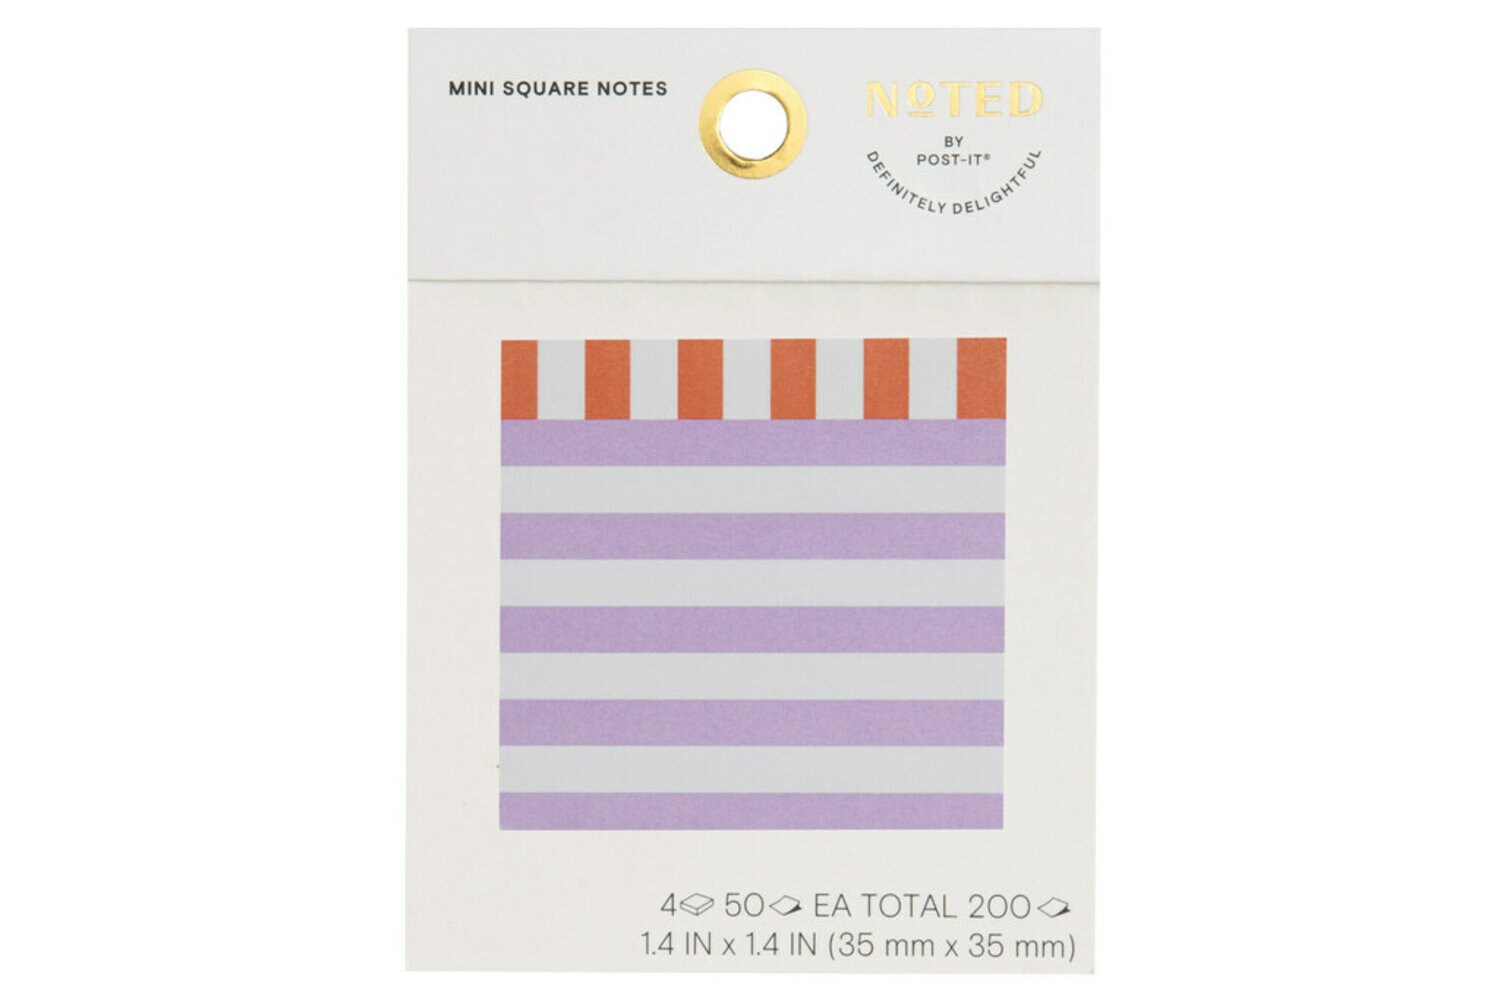 7100274119 - Post-it Square Notes NTD6-33-4, 2.9 in x 2.8 in (73 mm x 71 mm)